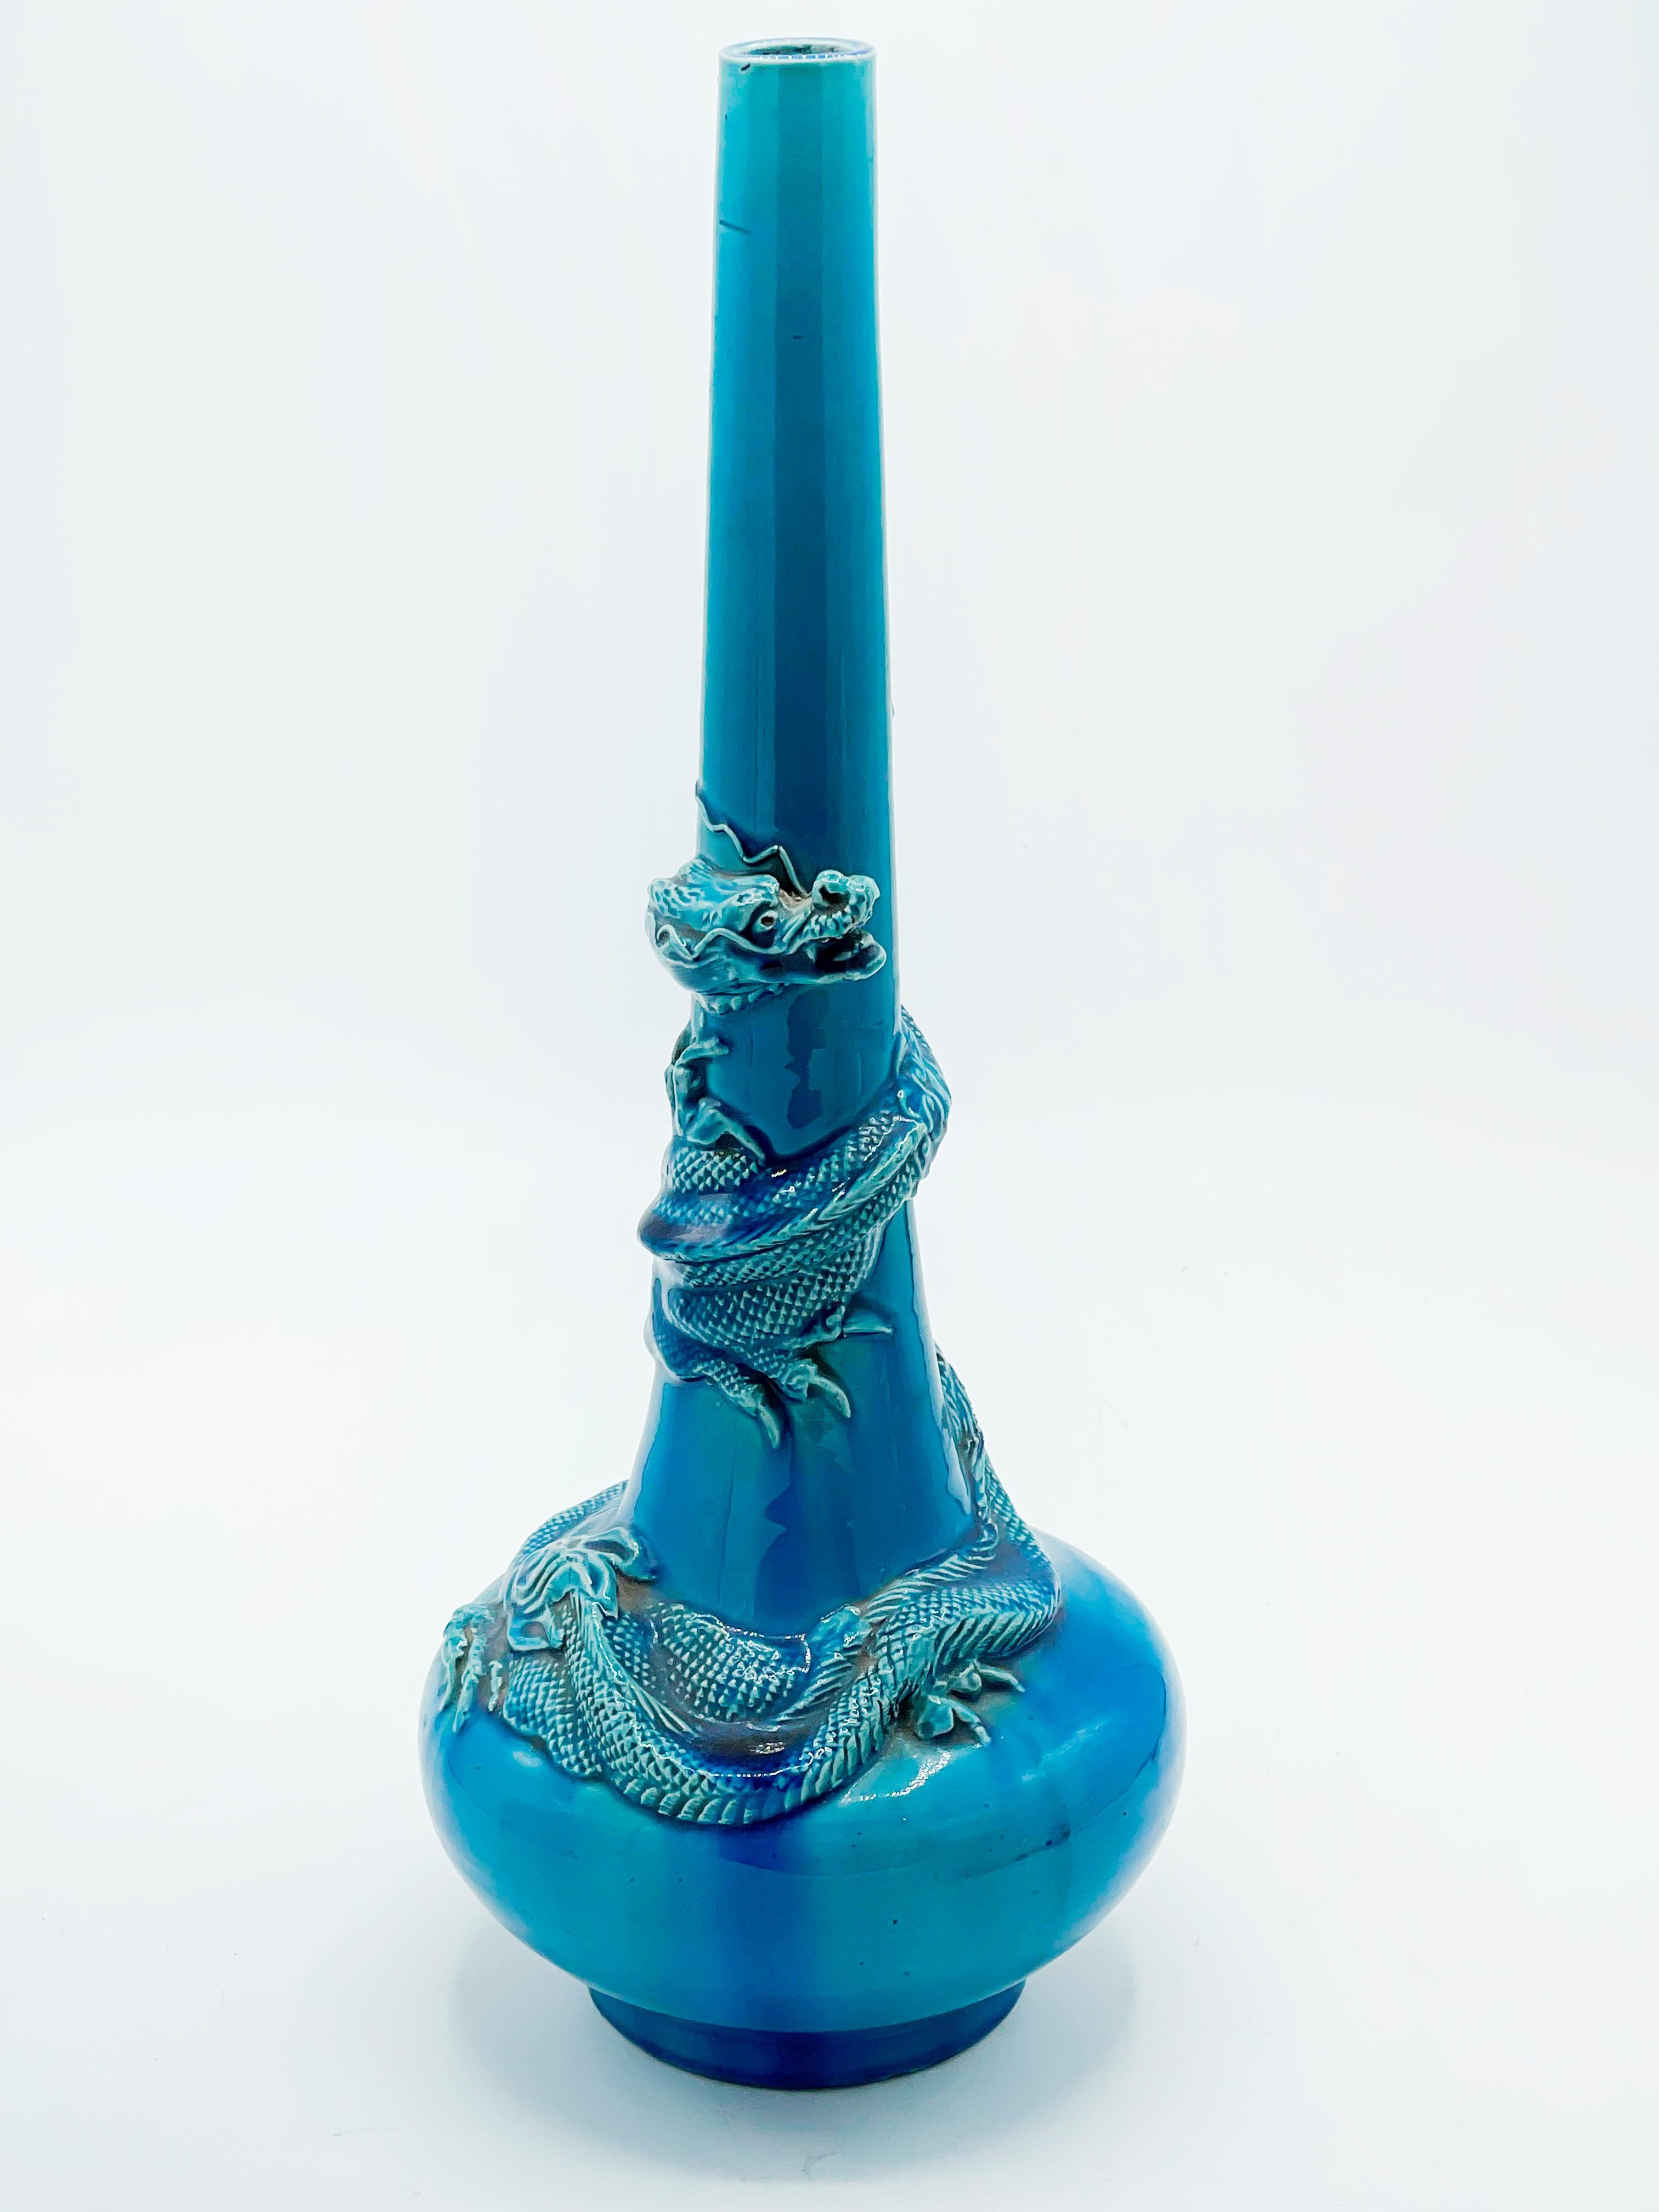 Japan, a fine robin’s egg blue -writhing dragon- porcelain vase, Awaji Kiln from the late Meiji period (1868-1912).

Dimensions: , 16” high 6” wide at base, Meiji period, (1868-1912).

The heavy porcelain vase crafted in a tubular modernist form